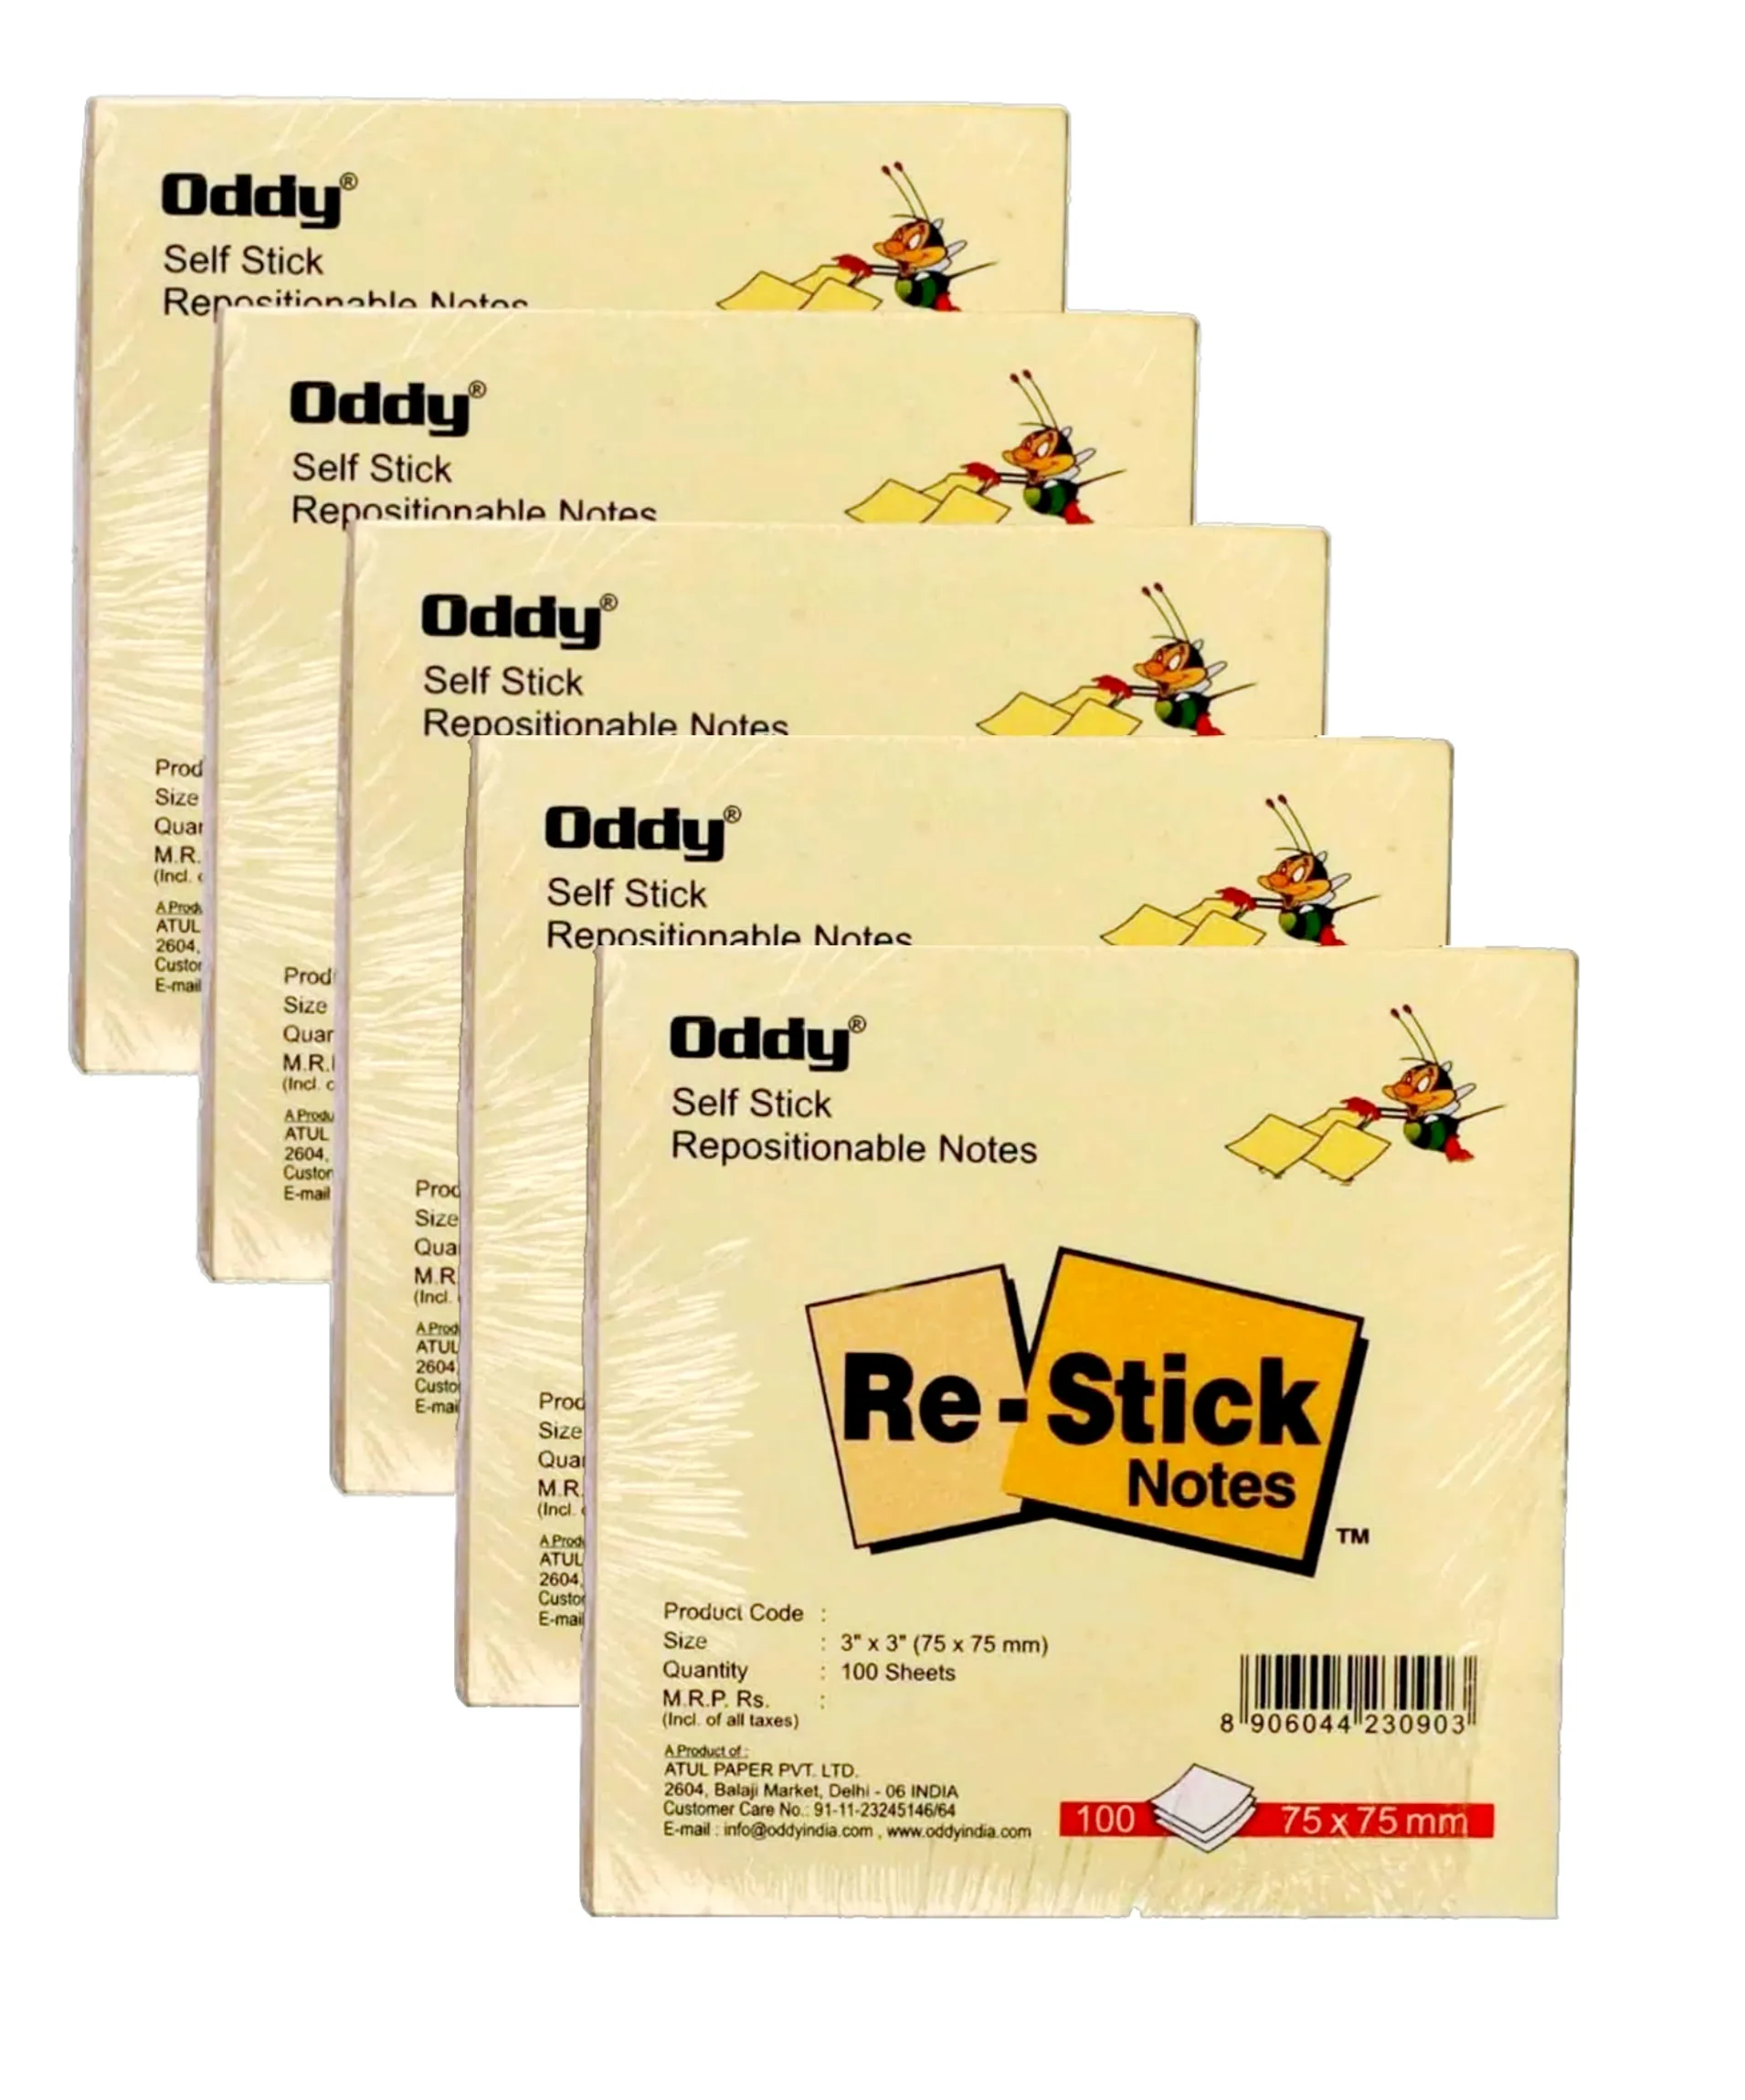 Oddy Self Stick Repositionable Notes 3"X3" (75X75 mm) 5 Pack of 100 Sheets